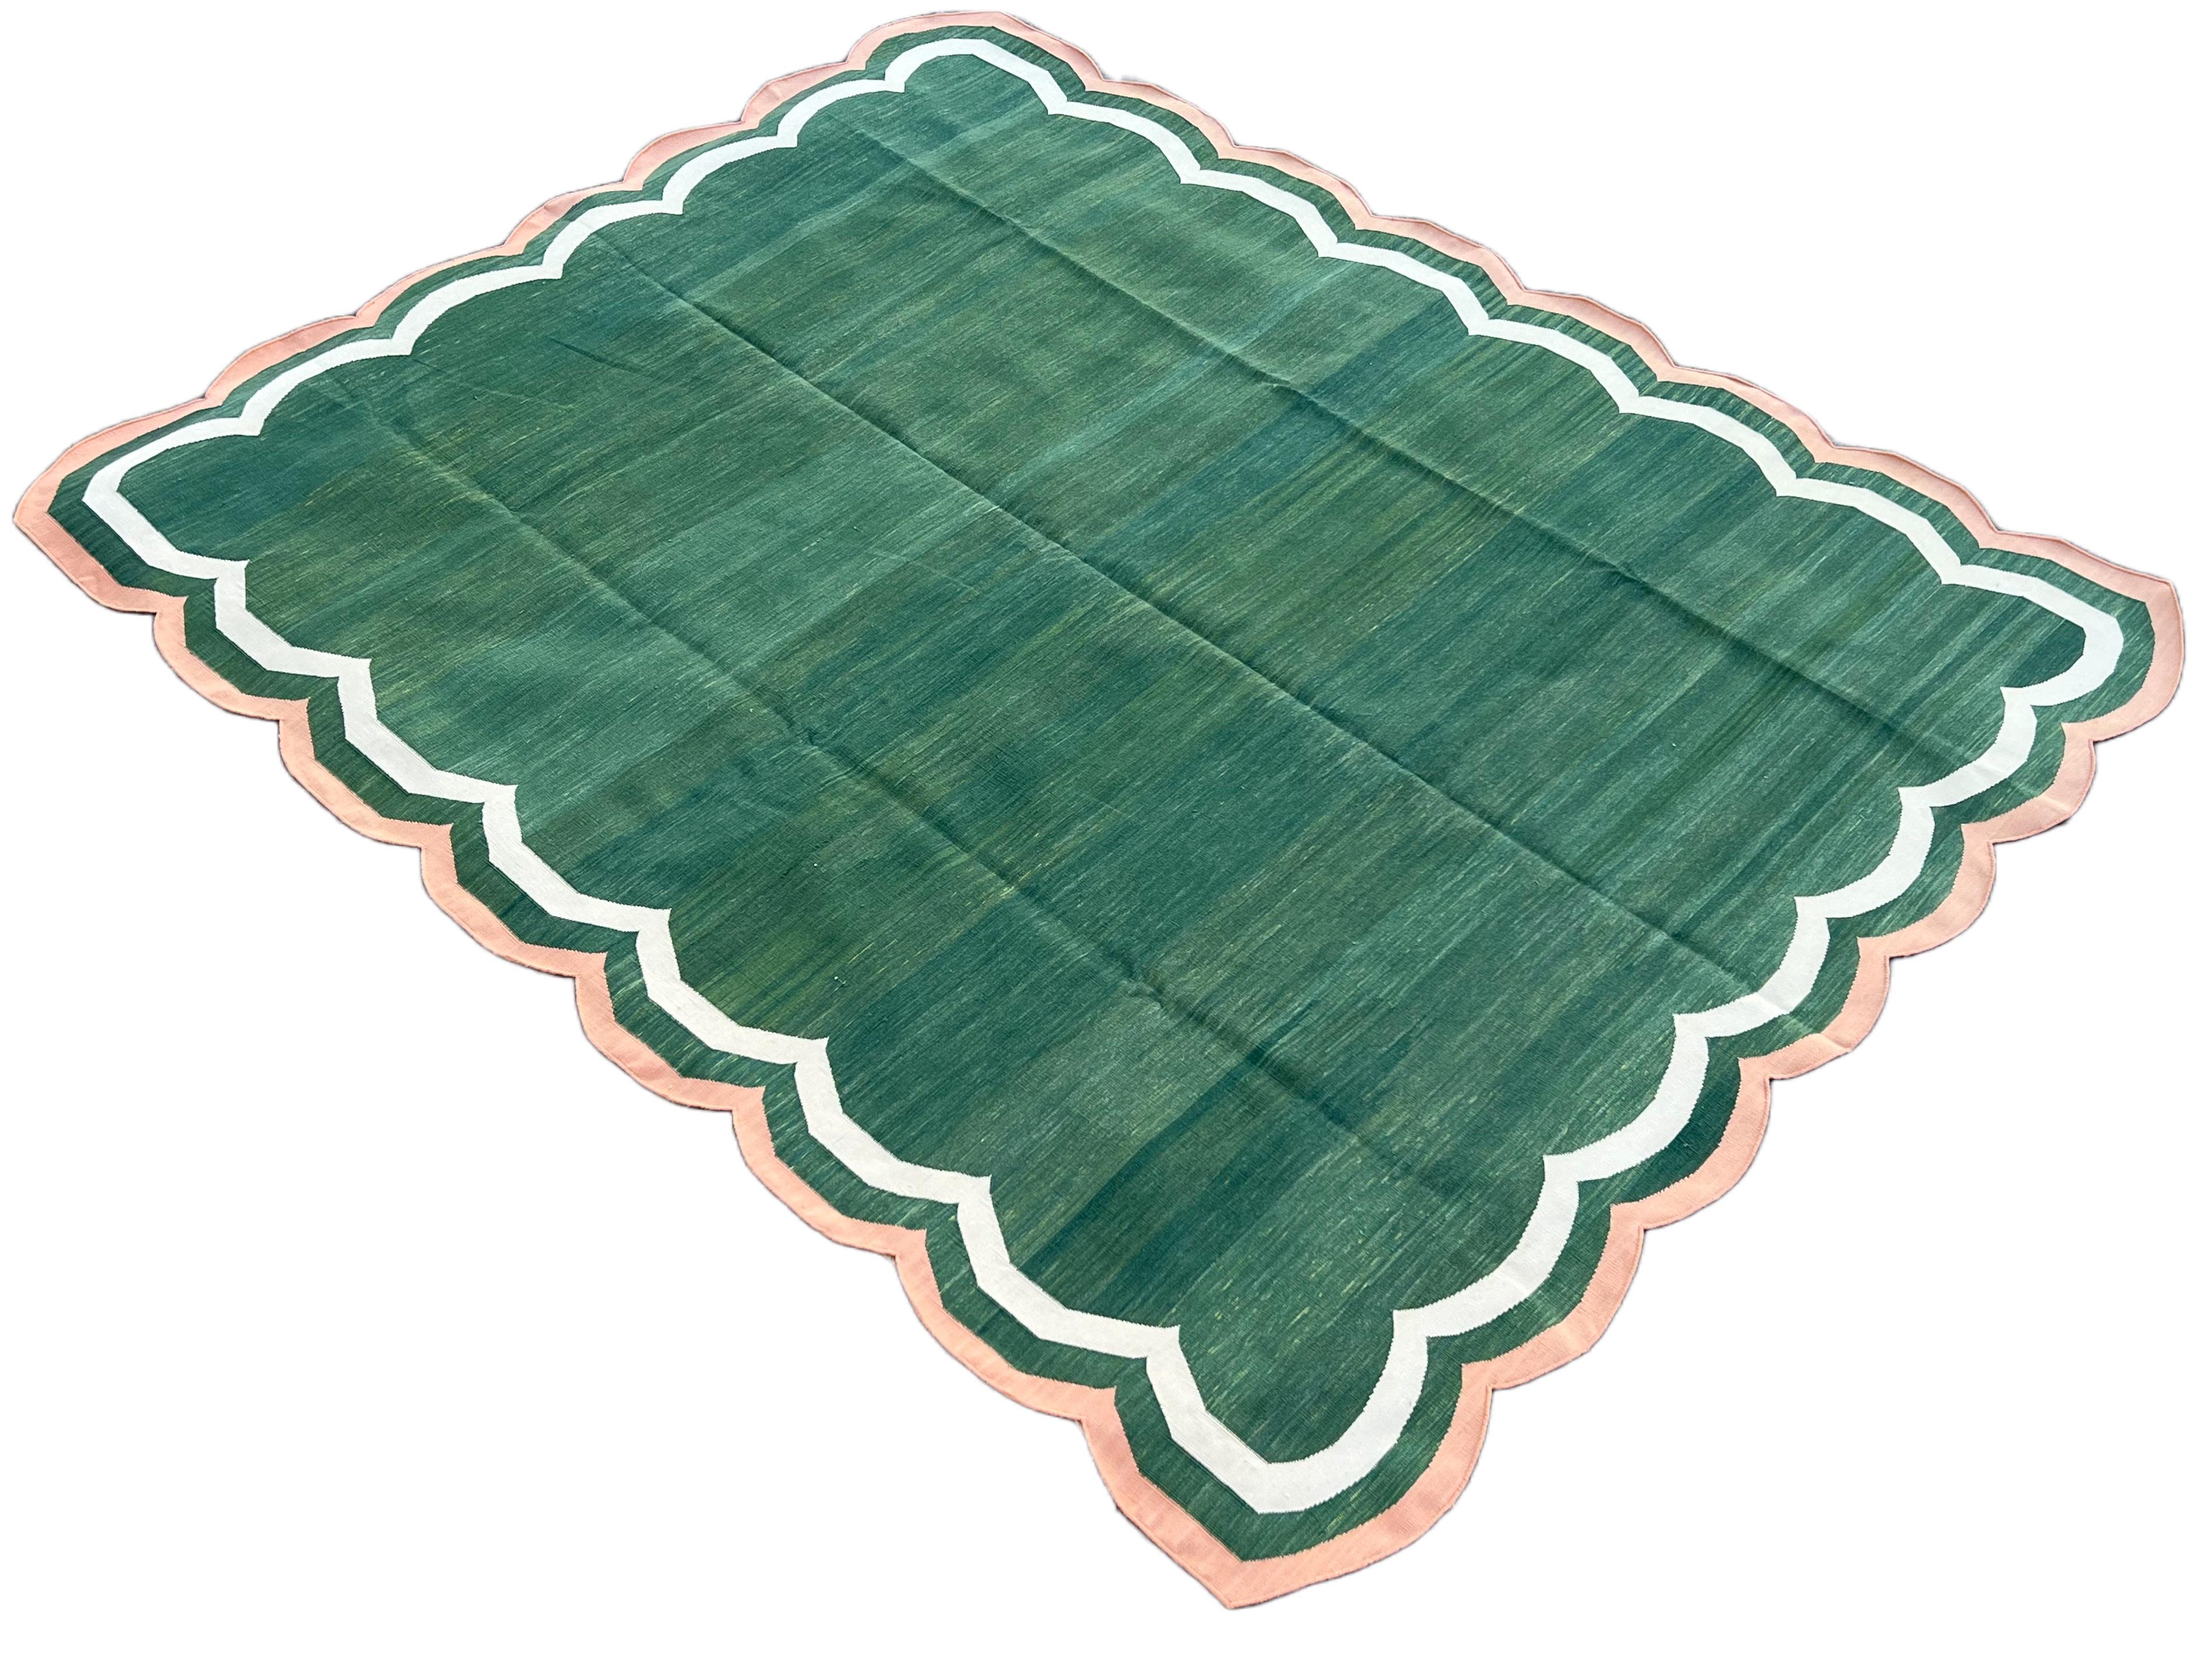 Cotton Vegetable Dyed Green and Coral 4 Sided Indian Scalloped Rug - 8'x10'
These special flat-weave dhurries are hand-woven with 15 ply 100% cotton yarn. Due to the special manufacturing techniques used to create our rugs, the size and color of